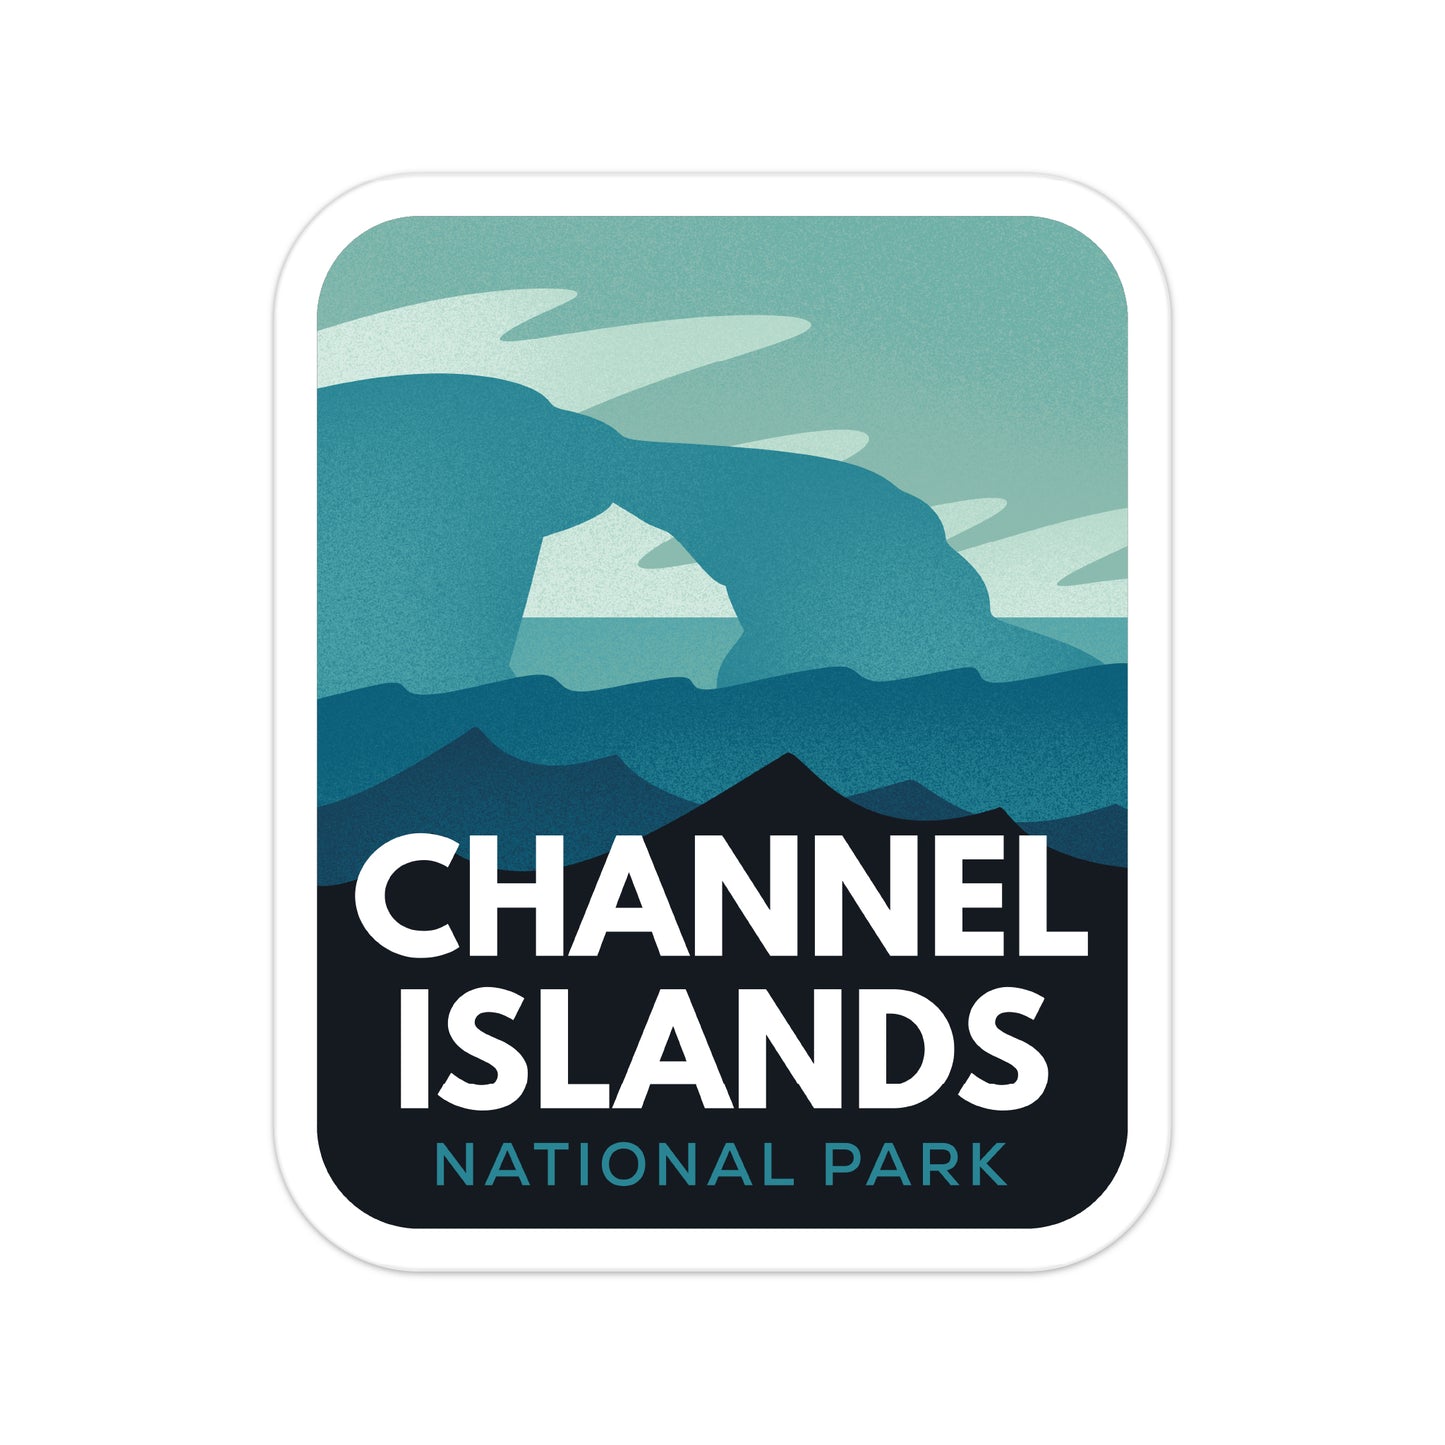 A sticker of Channel Islands National Park